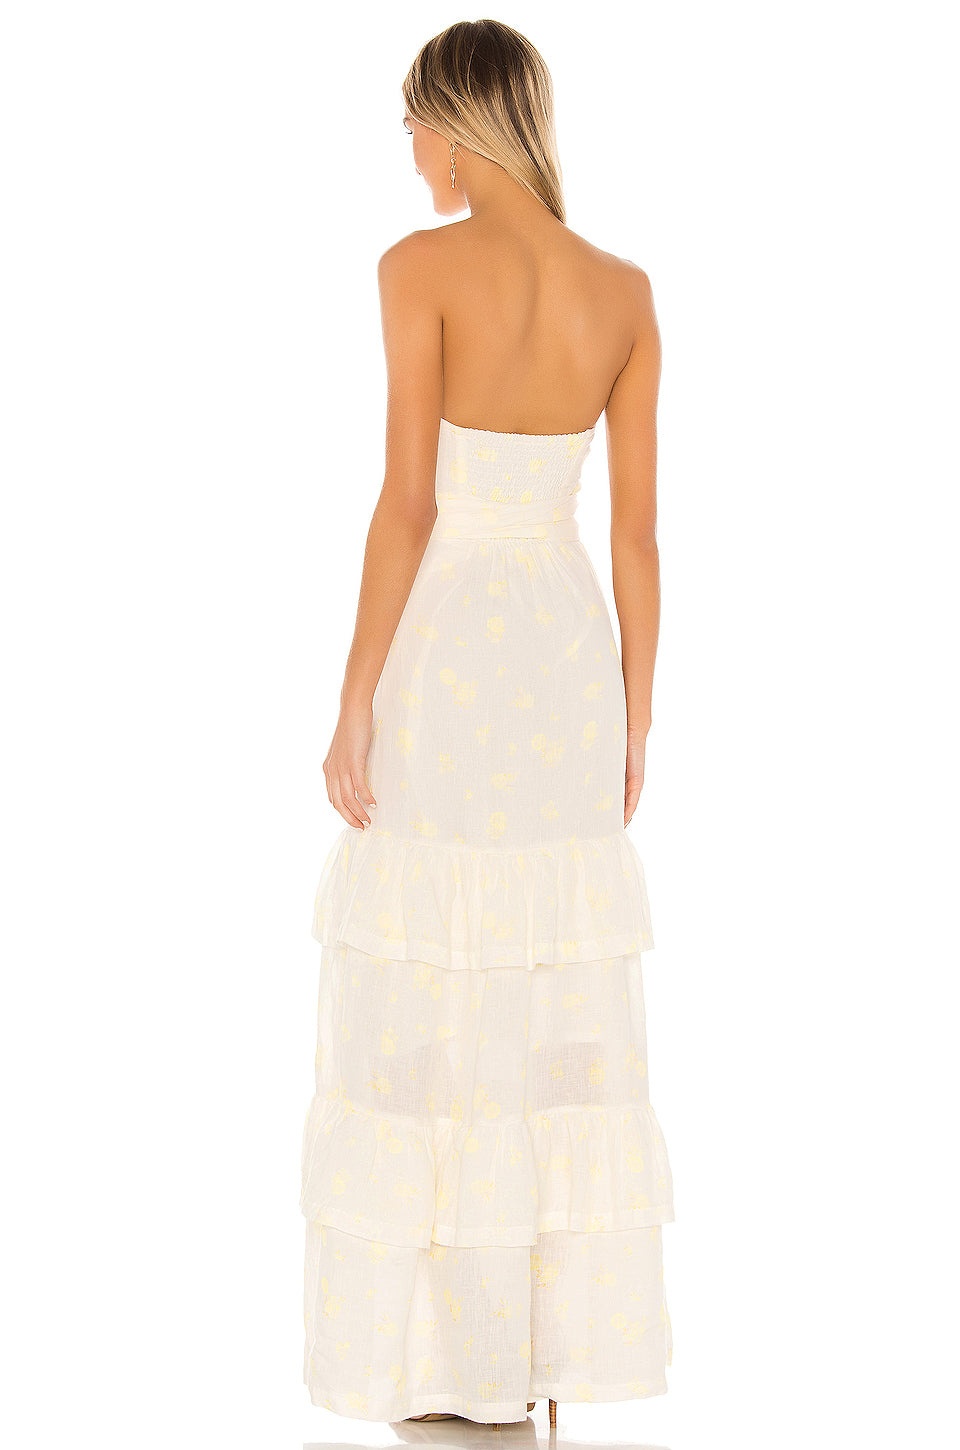 Arlo Dress in FADED YELLOW FLORAL